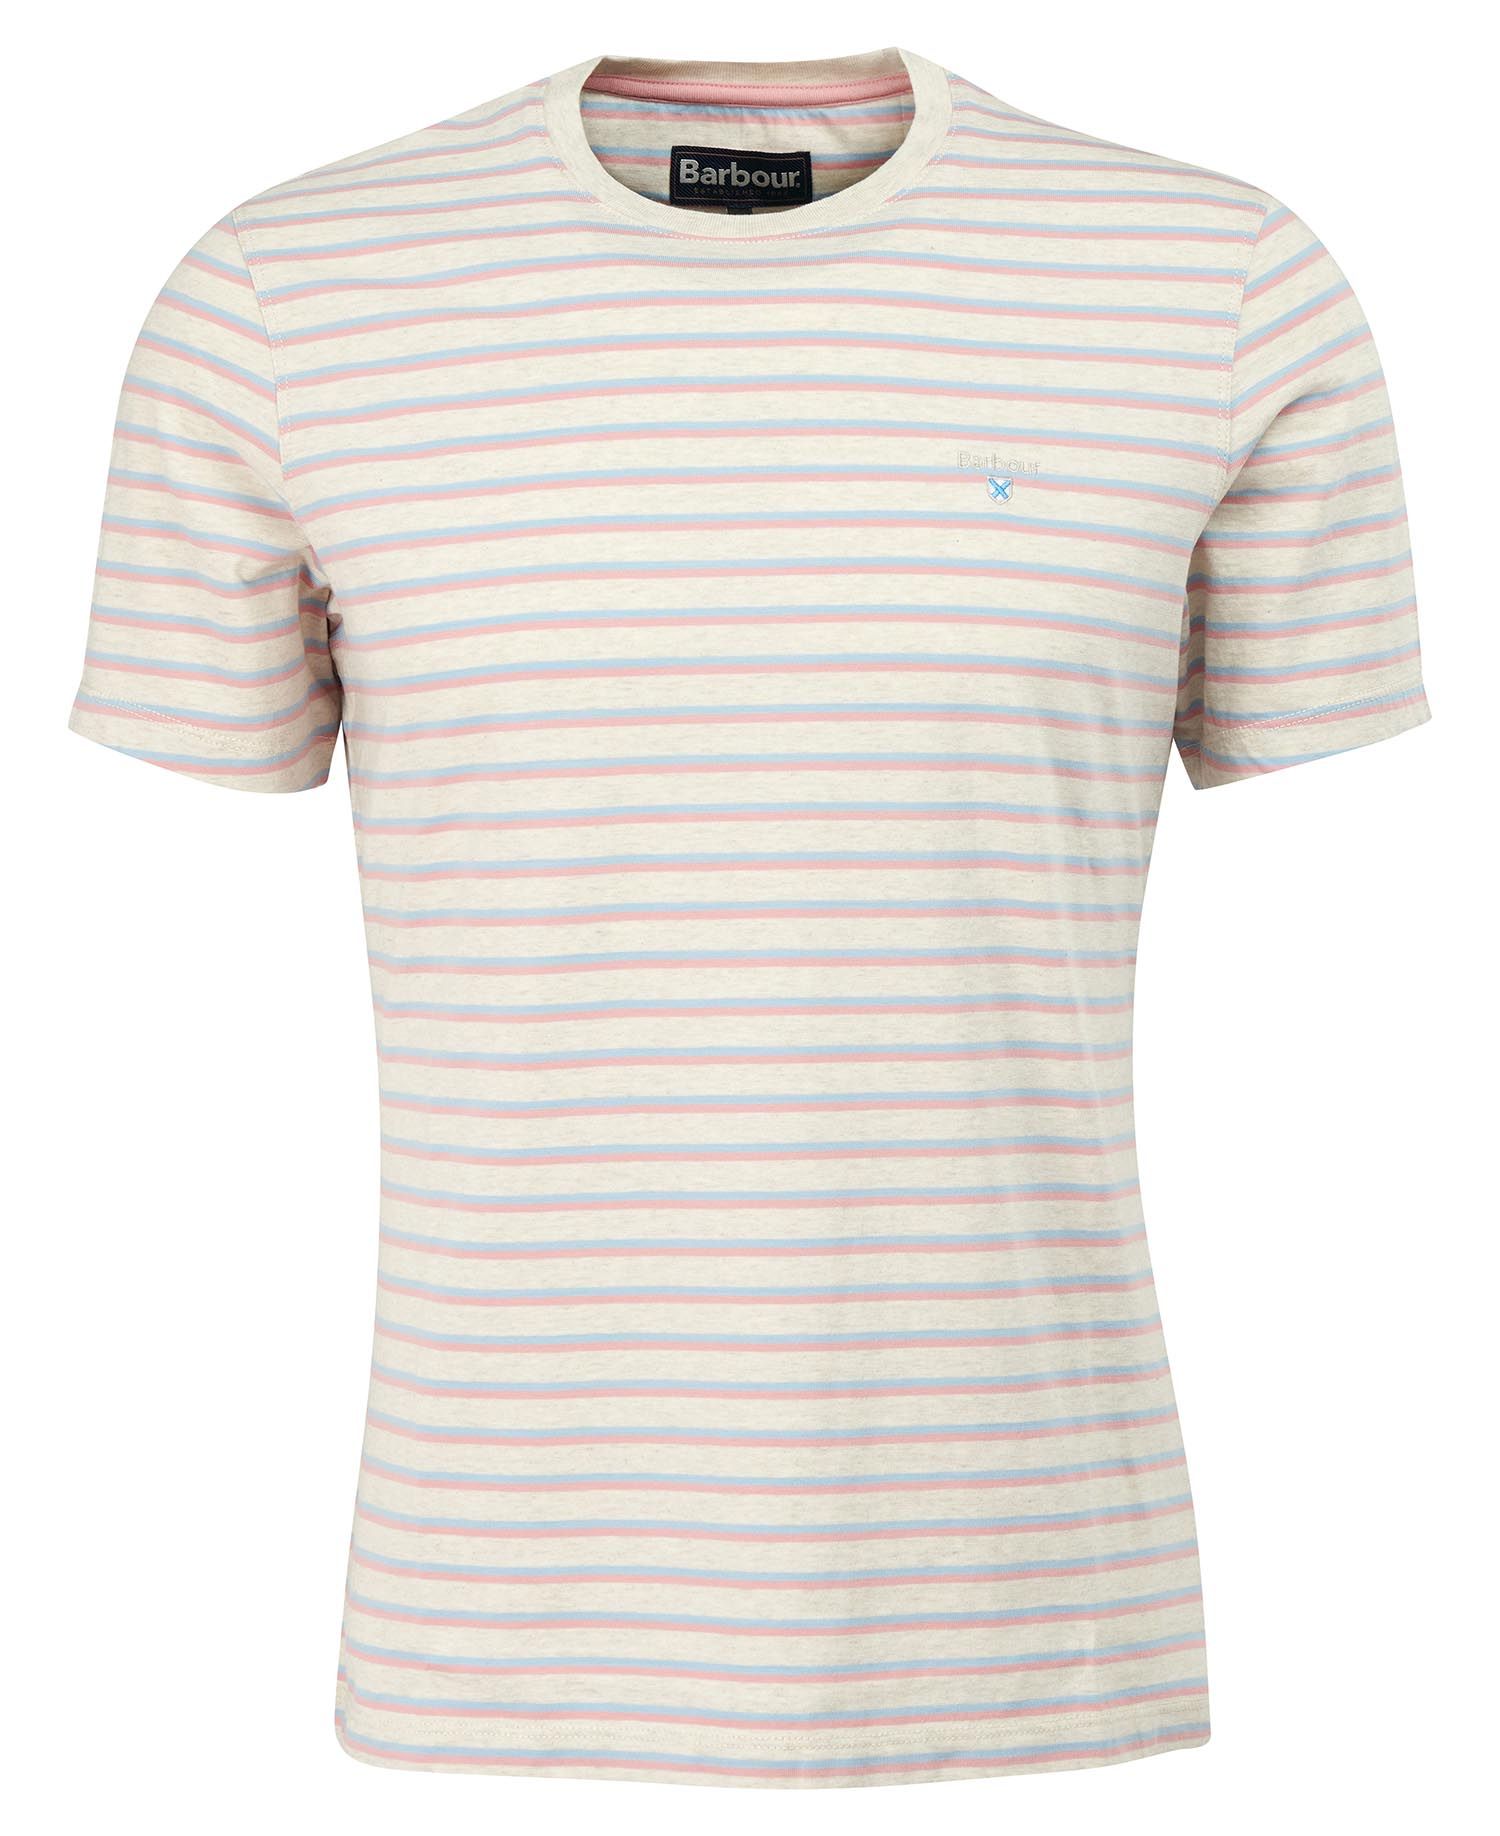 Shop the Barbour Ponte Striped T-Shirt today. | Barbour